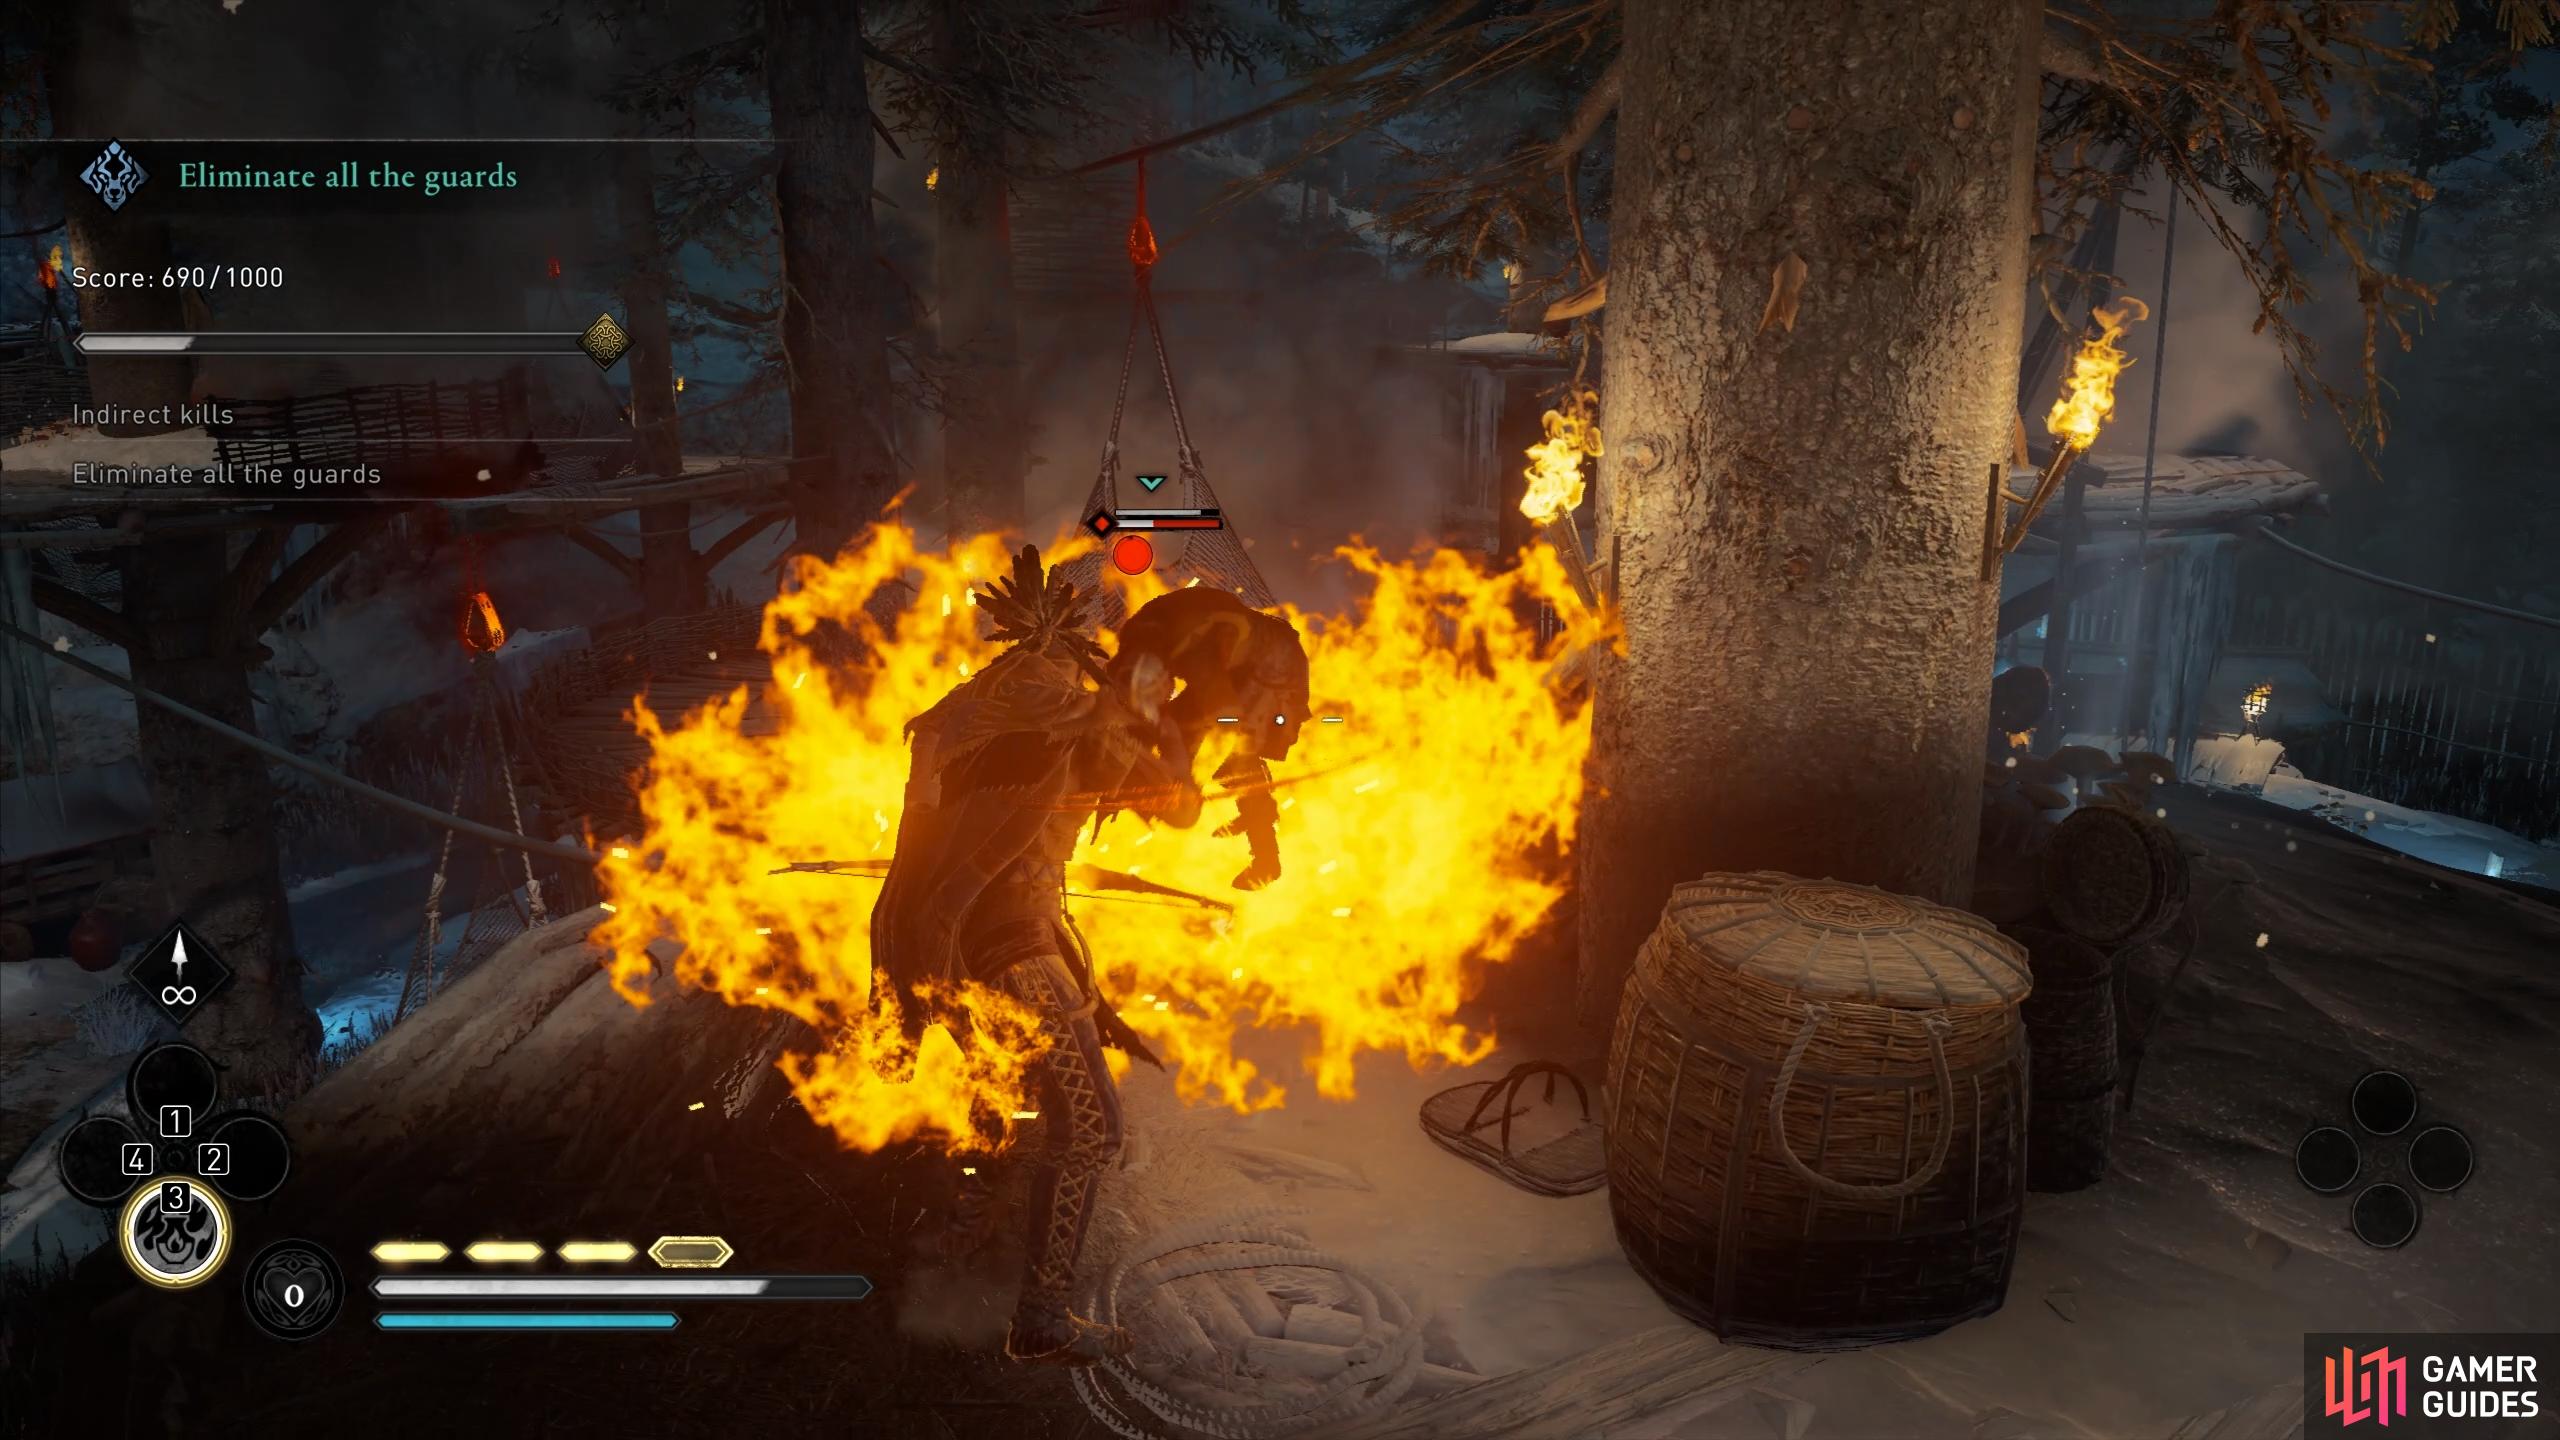 Use Ranged Fire Strike in melee to set an enemy on fire, killing them quickly and reliably.